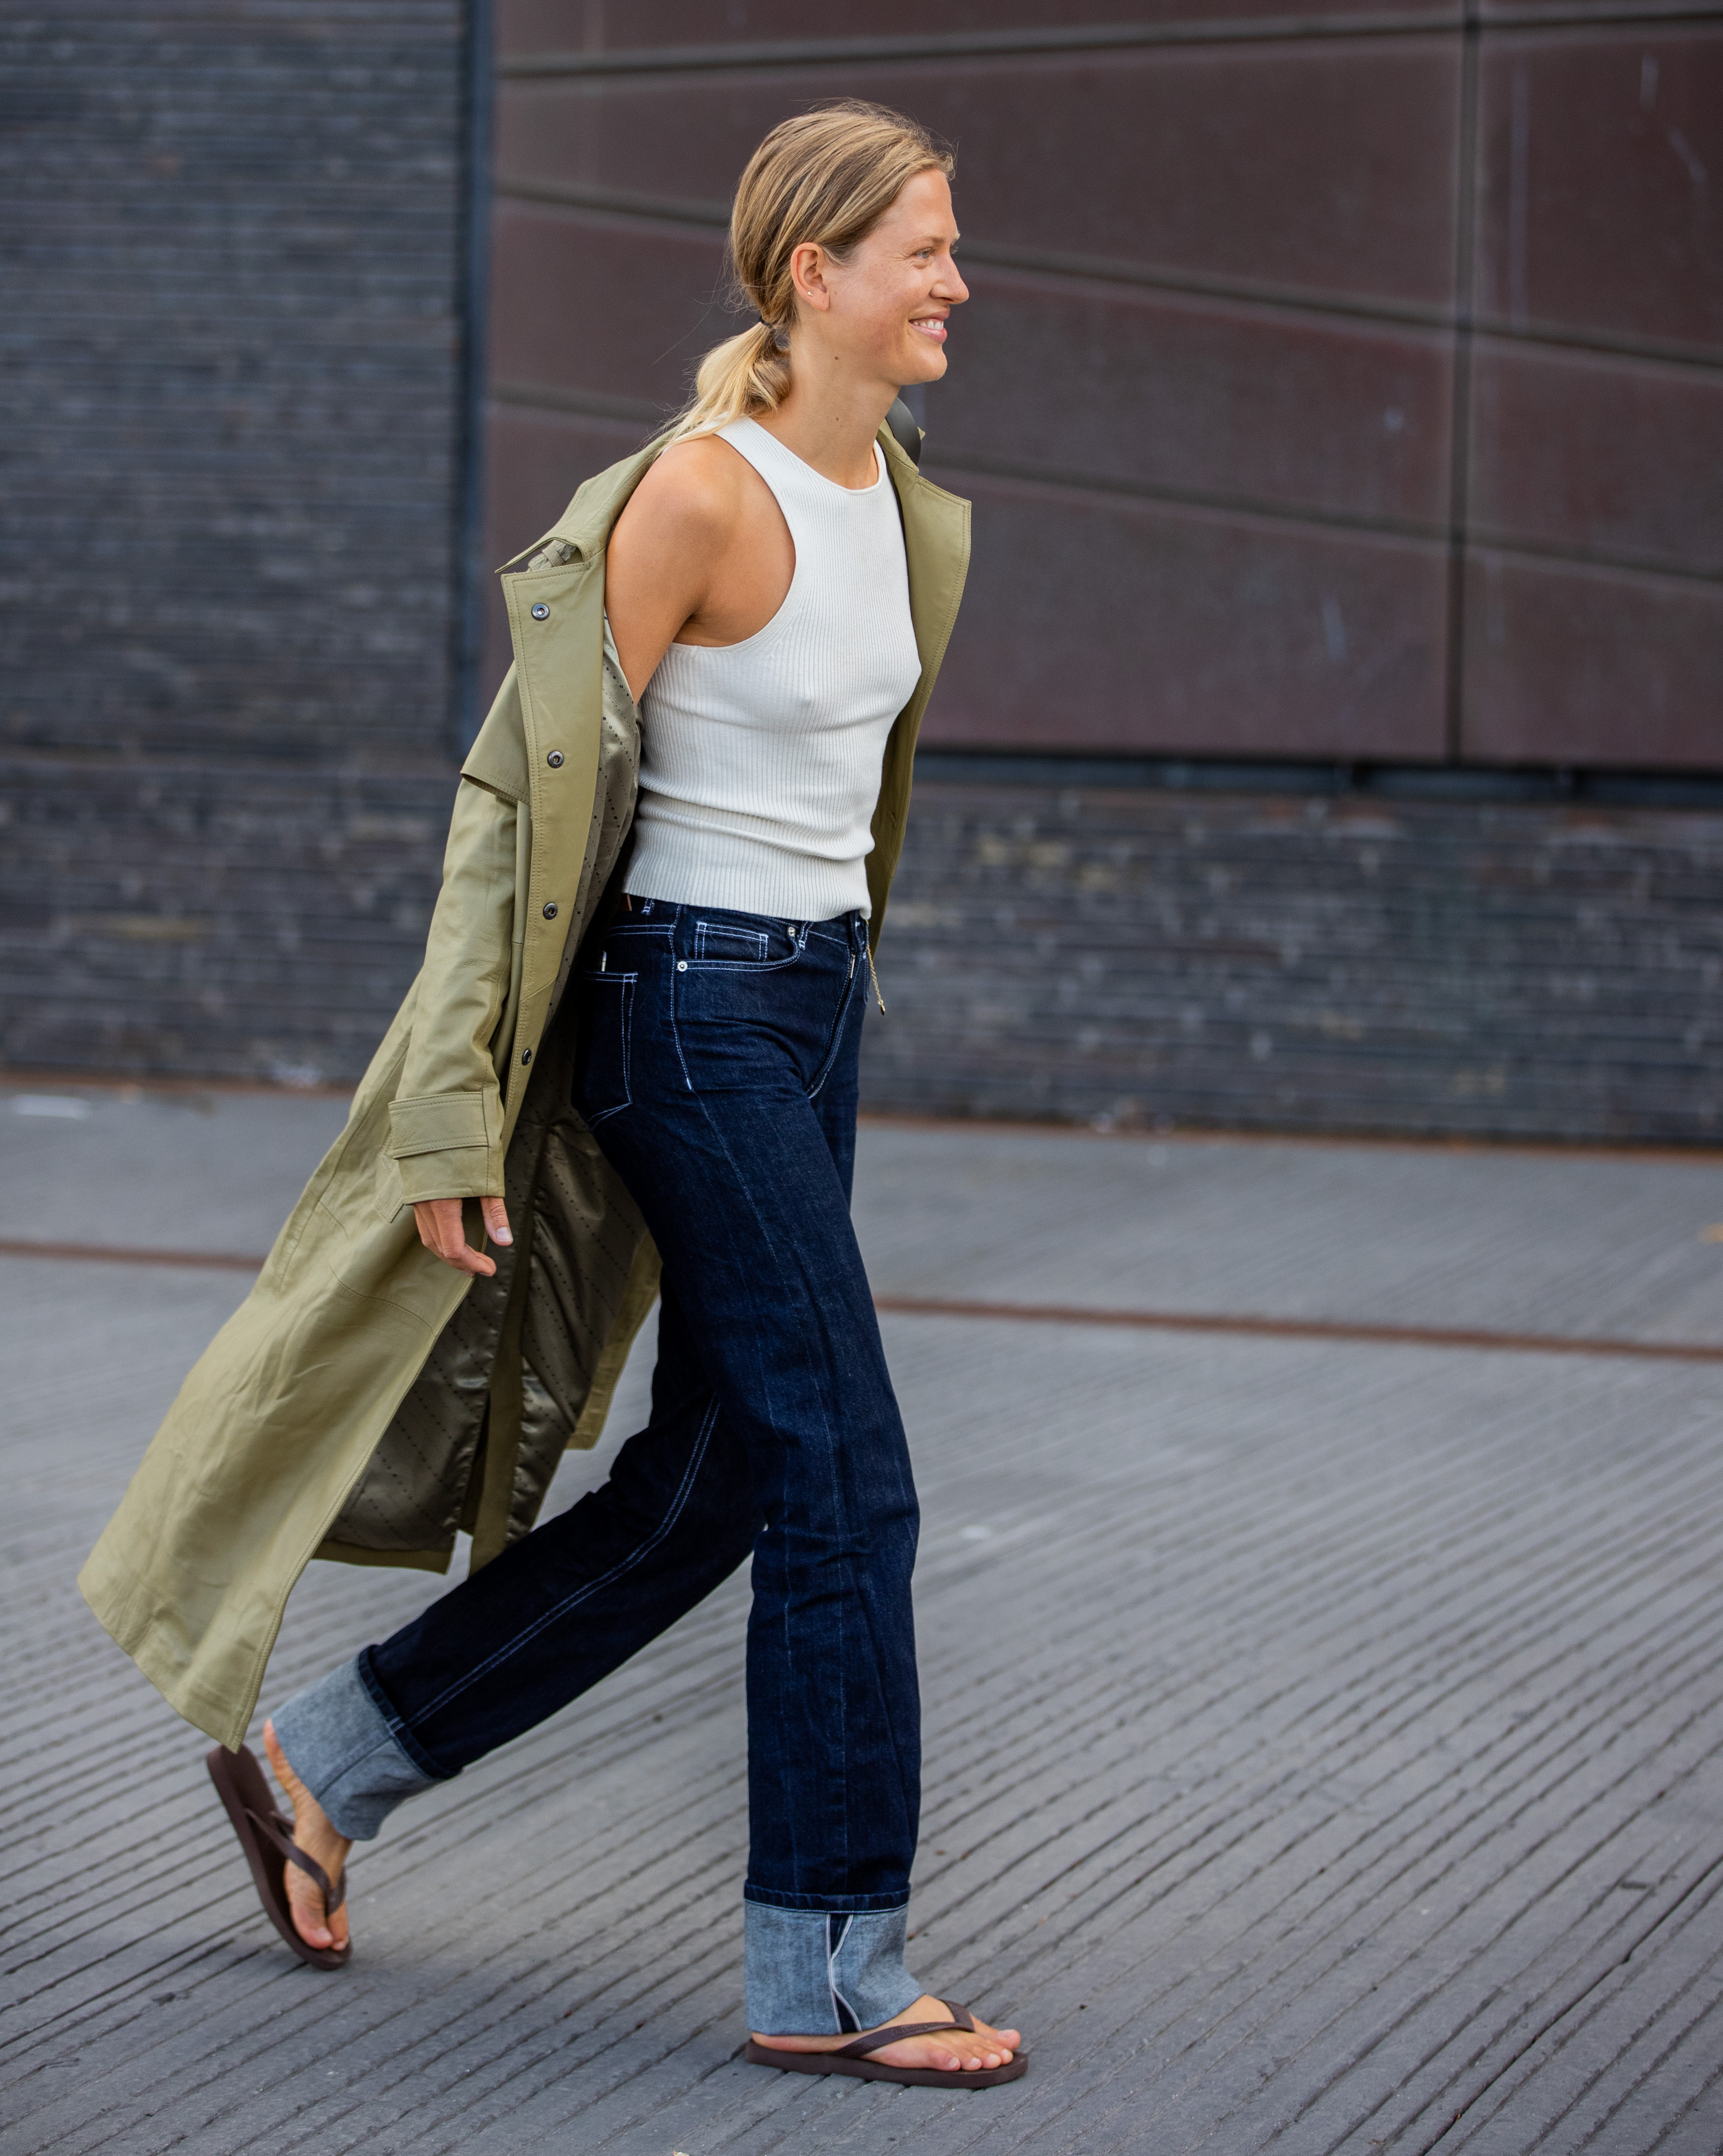 Laura Julie 13 Stylish Outfit Ideas With Cuffed Jeans Dark Wash Jeans Trench Coat Tank Top Model Street Style Copenhagen